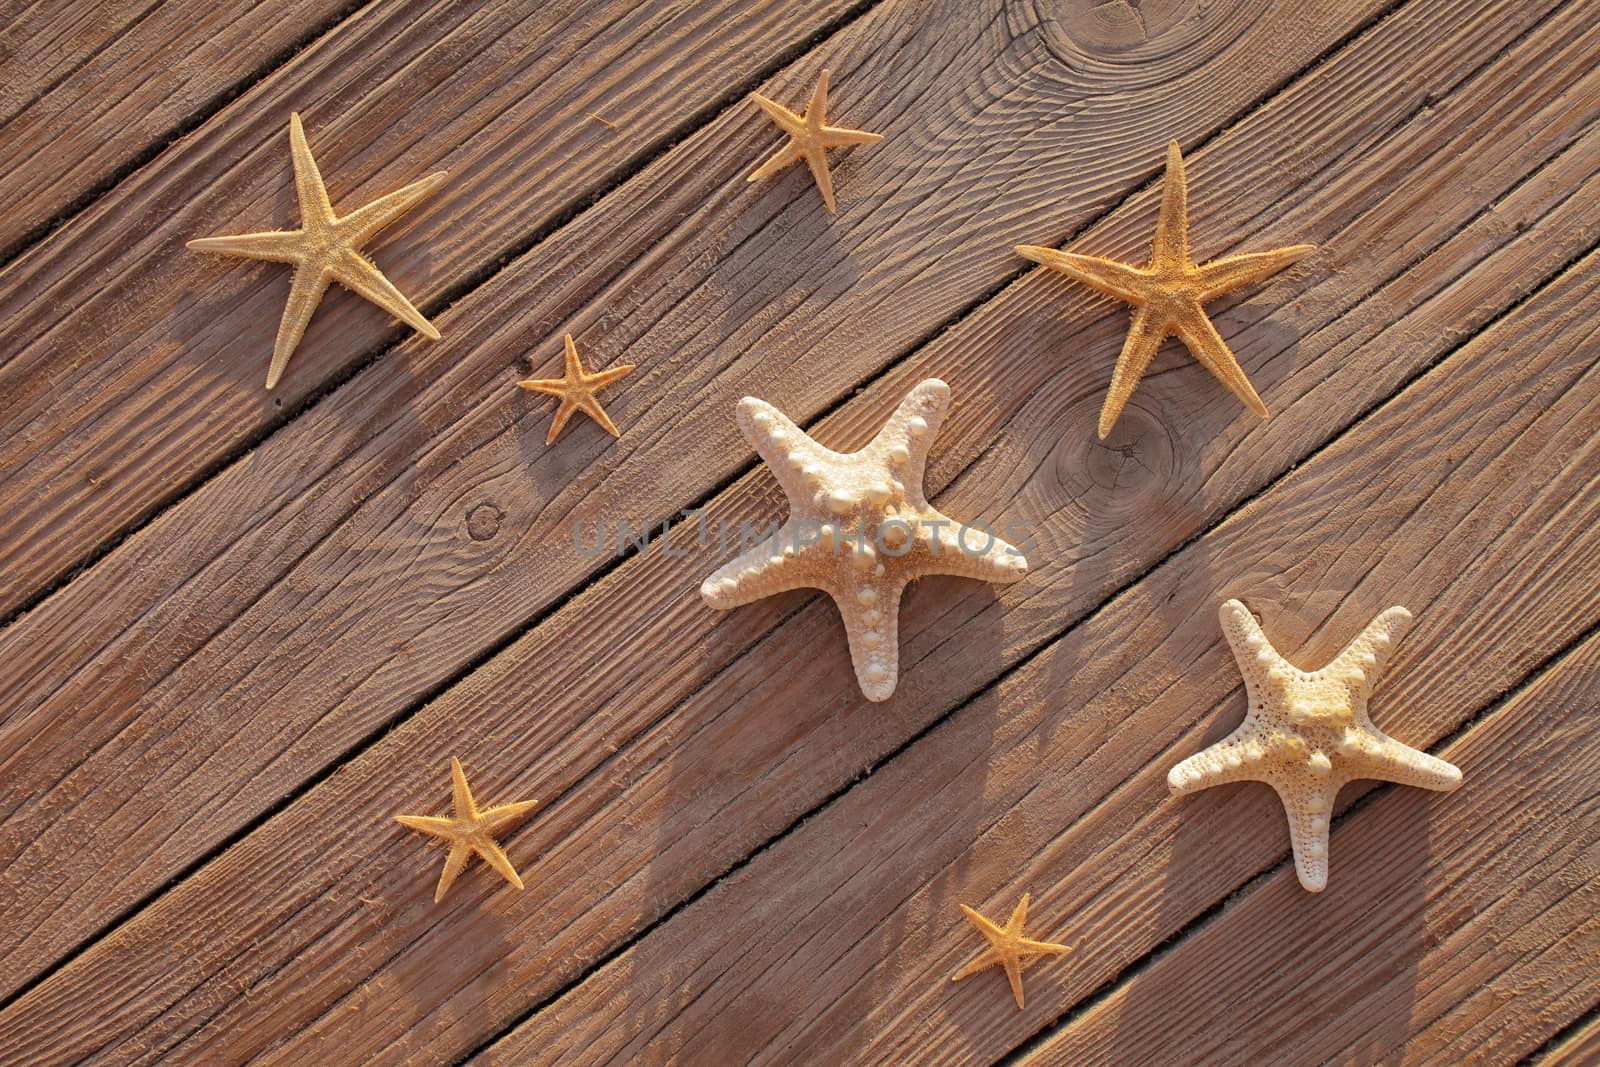 Starfish on a wooden pier poured over a wooden deck. Summer vacation concept. Holidays by the sea. High quality photo